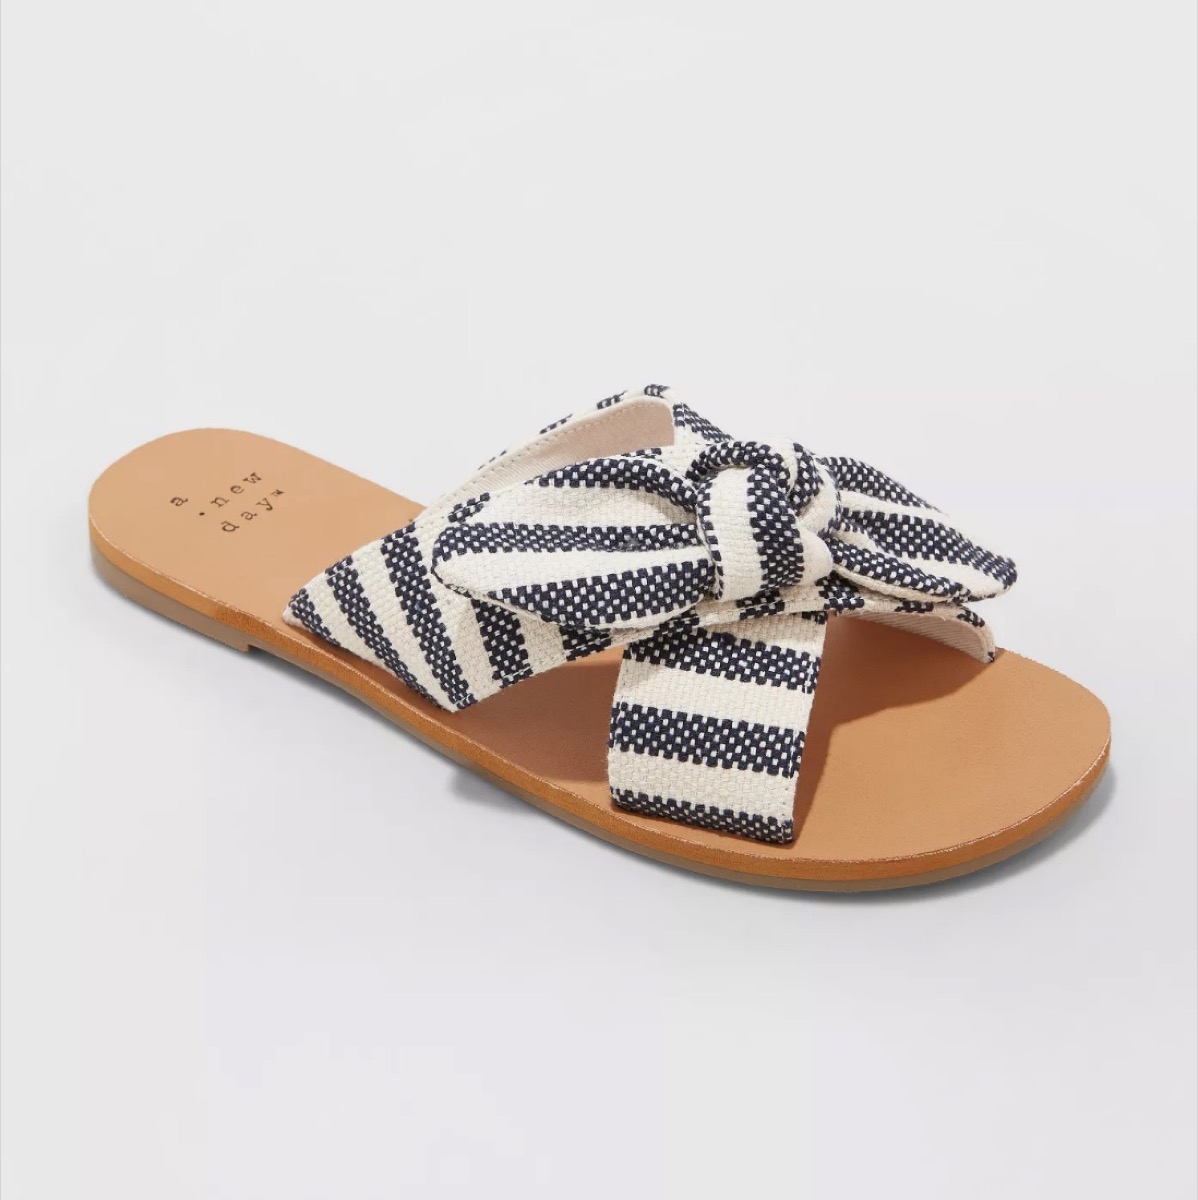 knotted bow sandals with blue and white stripes, affordable sandals